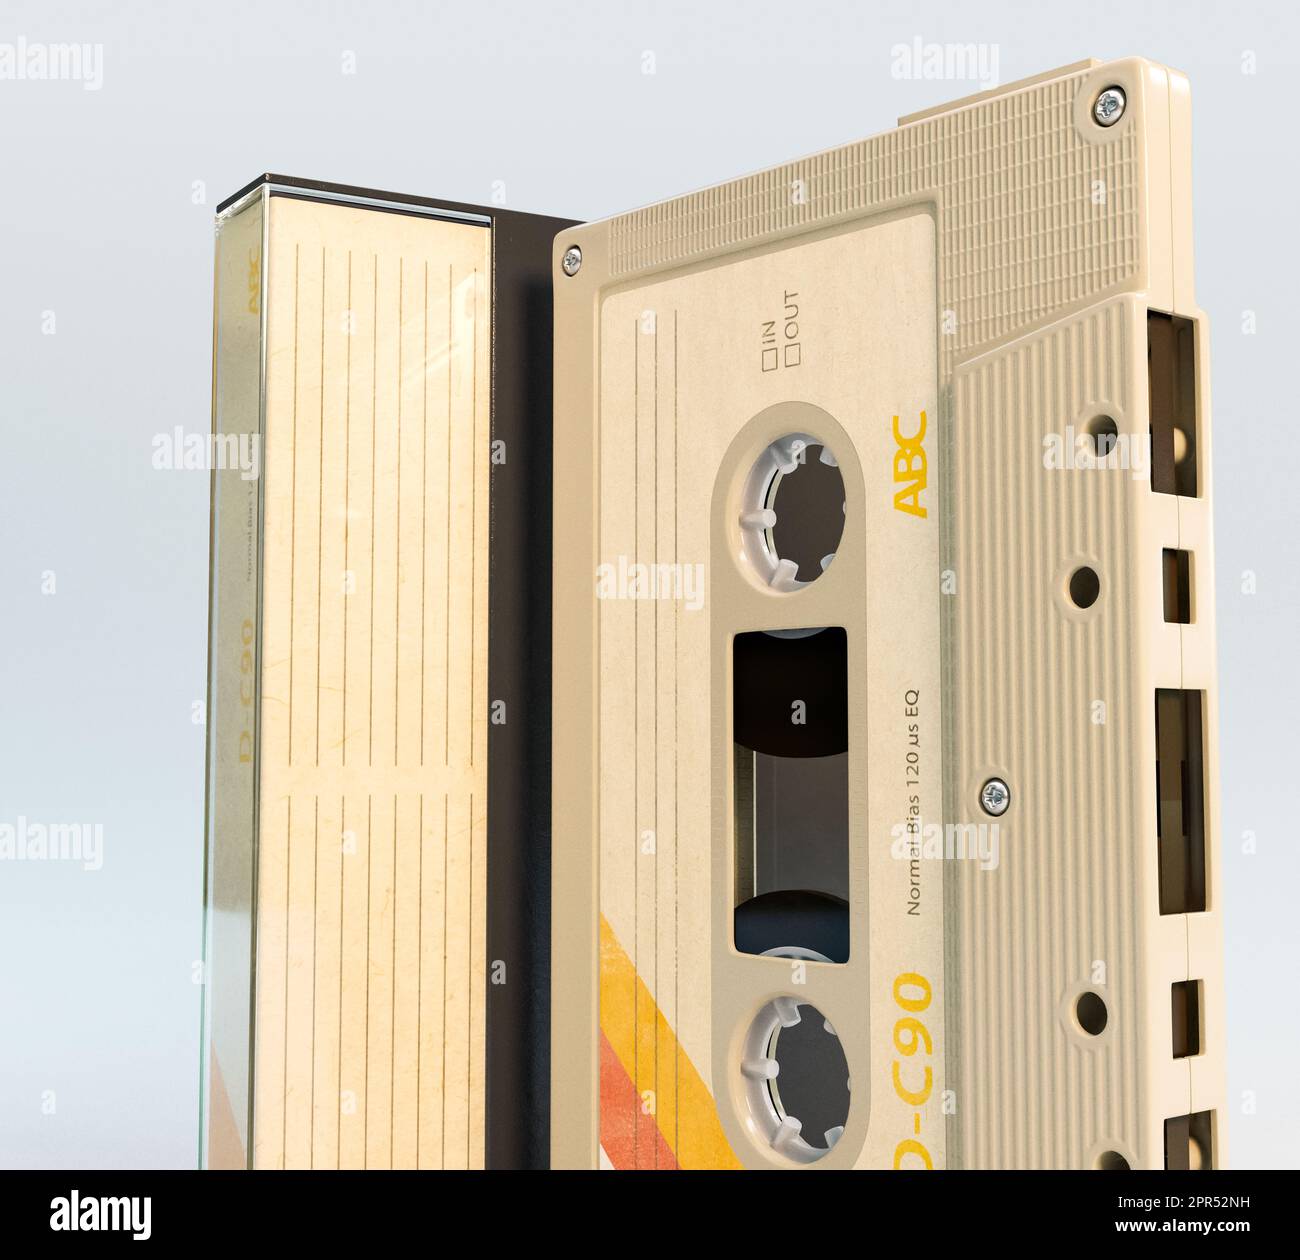 A concept of a recordable aduio cassette tape with a platic cover and cardboard insert - 3D render Stock Photo